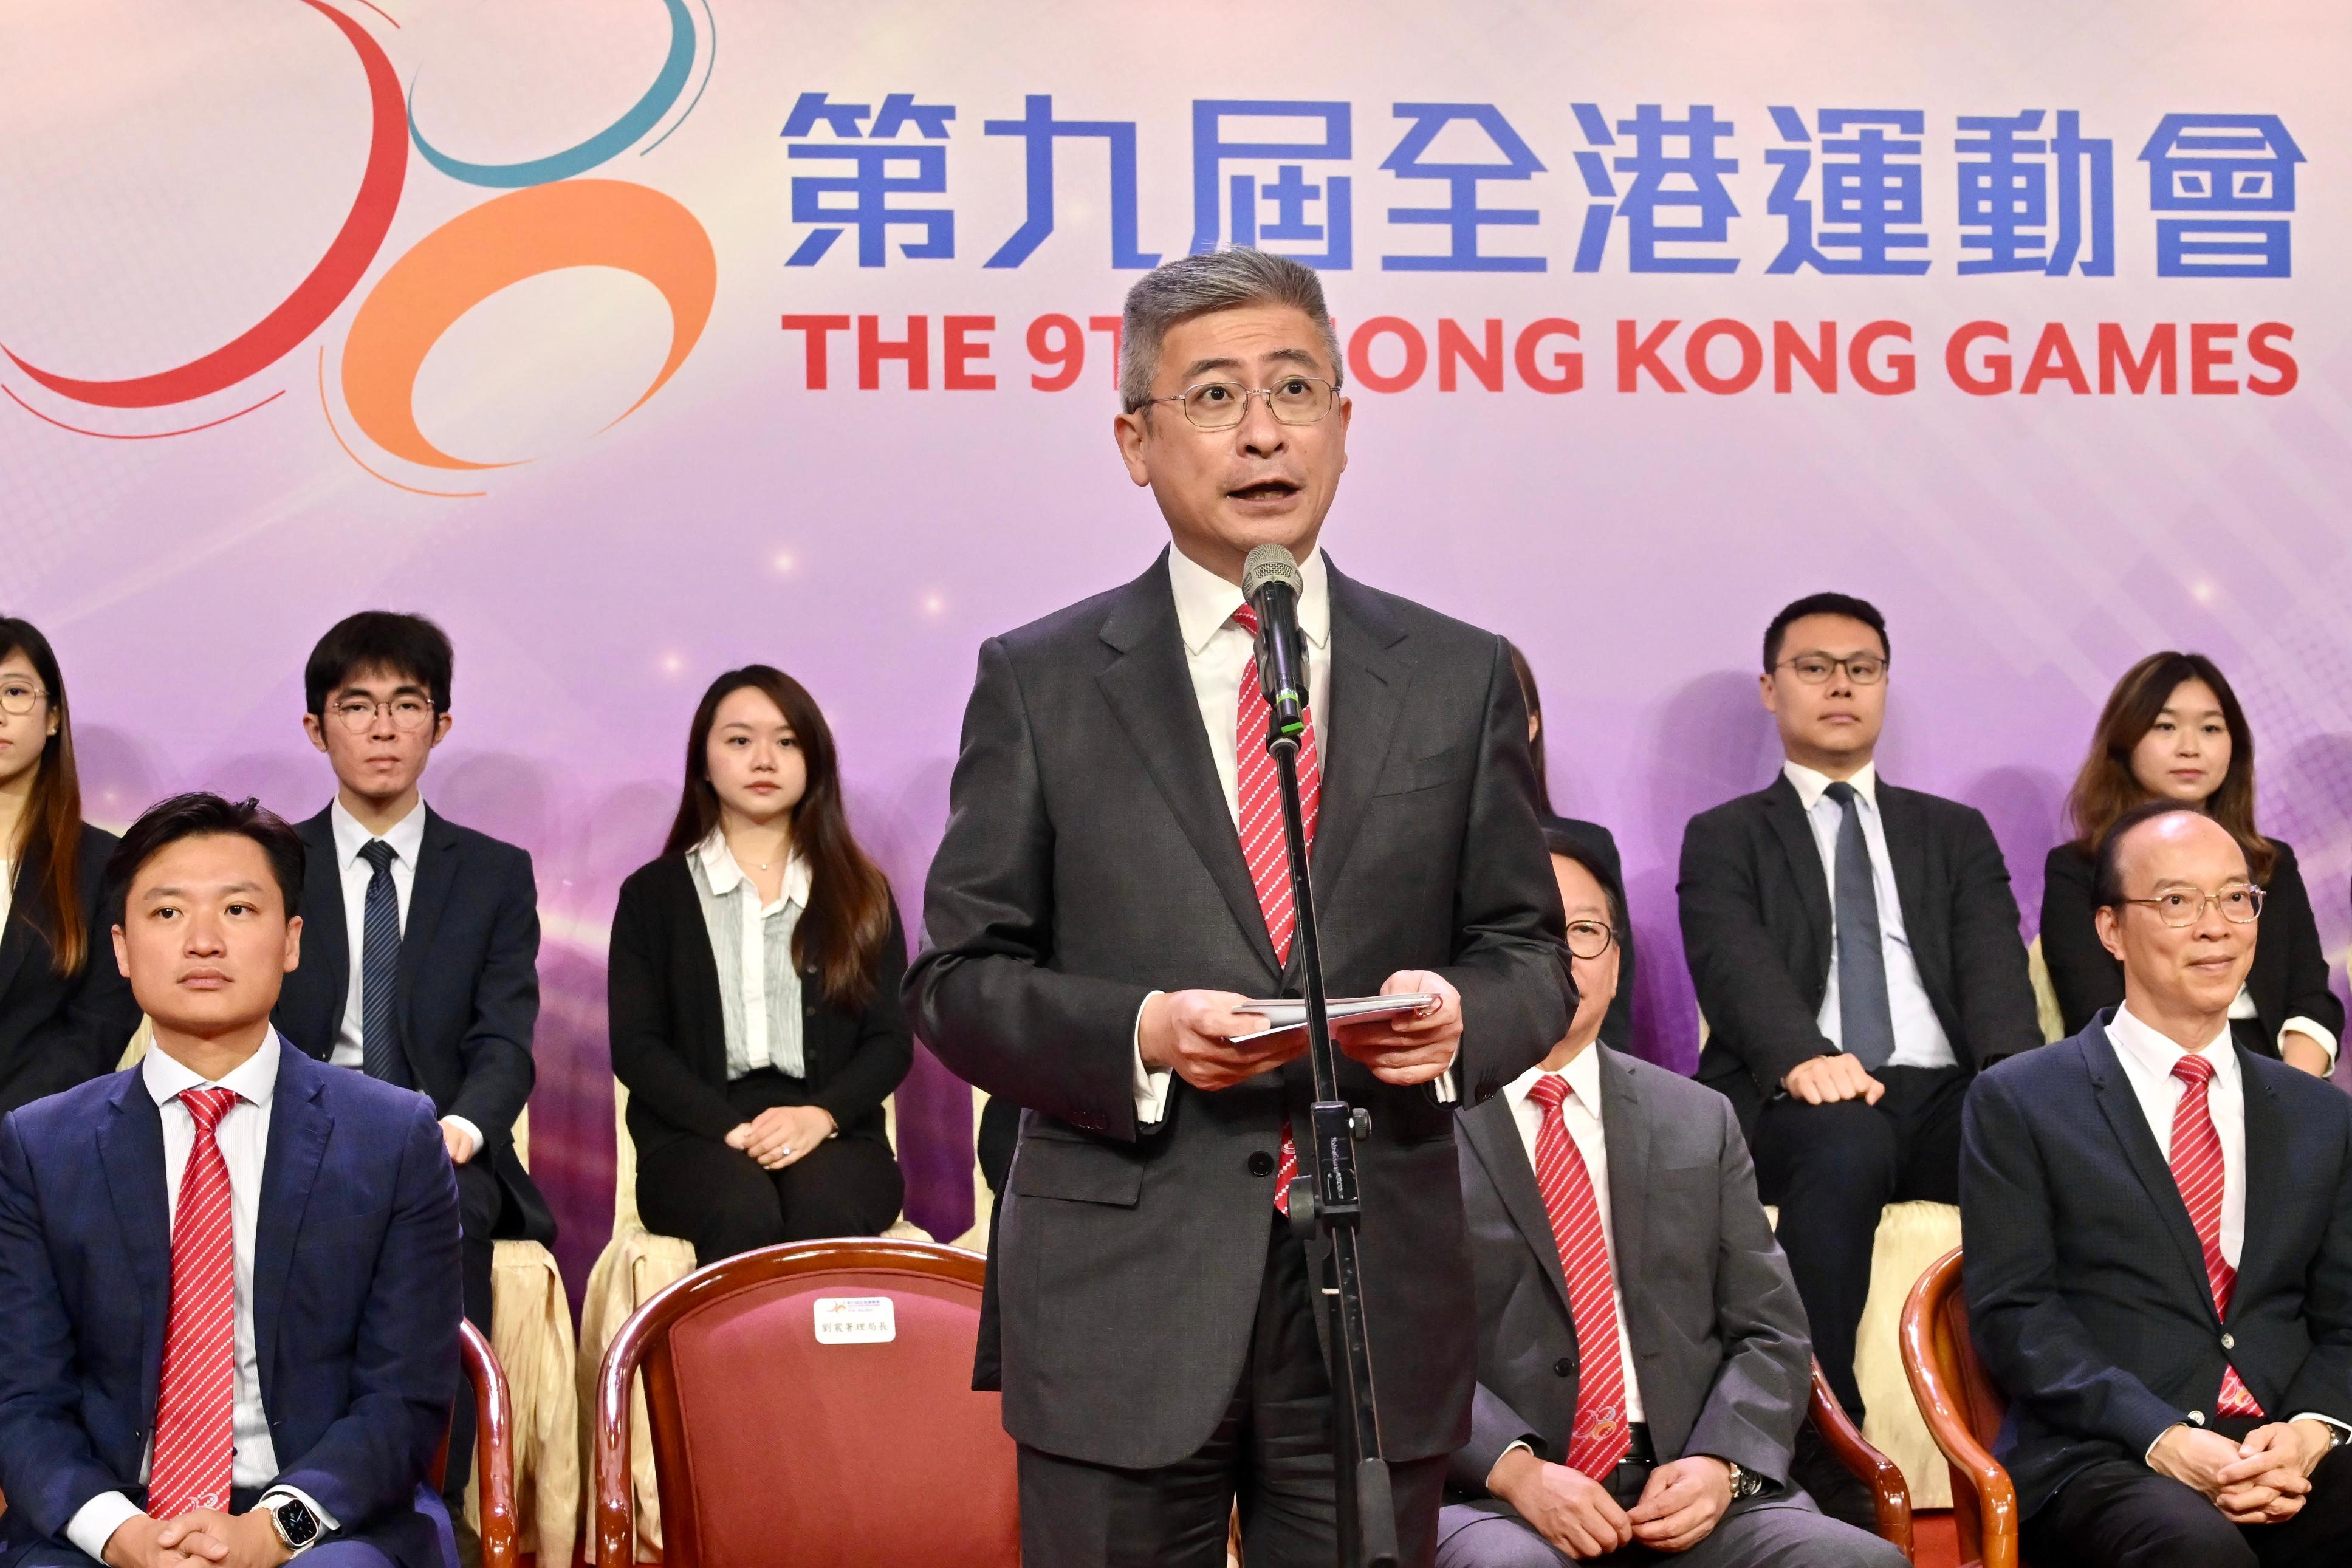 The 9th Hong Kong Games Opening Ceremony was held at the Hong Kong Coliseum today (April 21). Photo shows the Acting Secretary for Culture, Sports and Tourism, Mr Raistlin Lau, speaking at the ceremony.